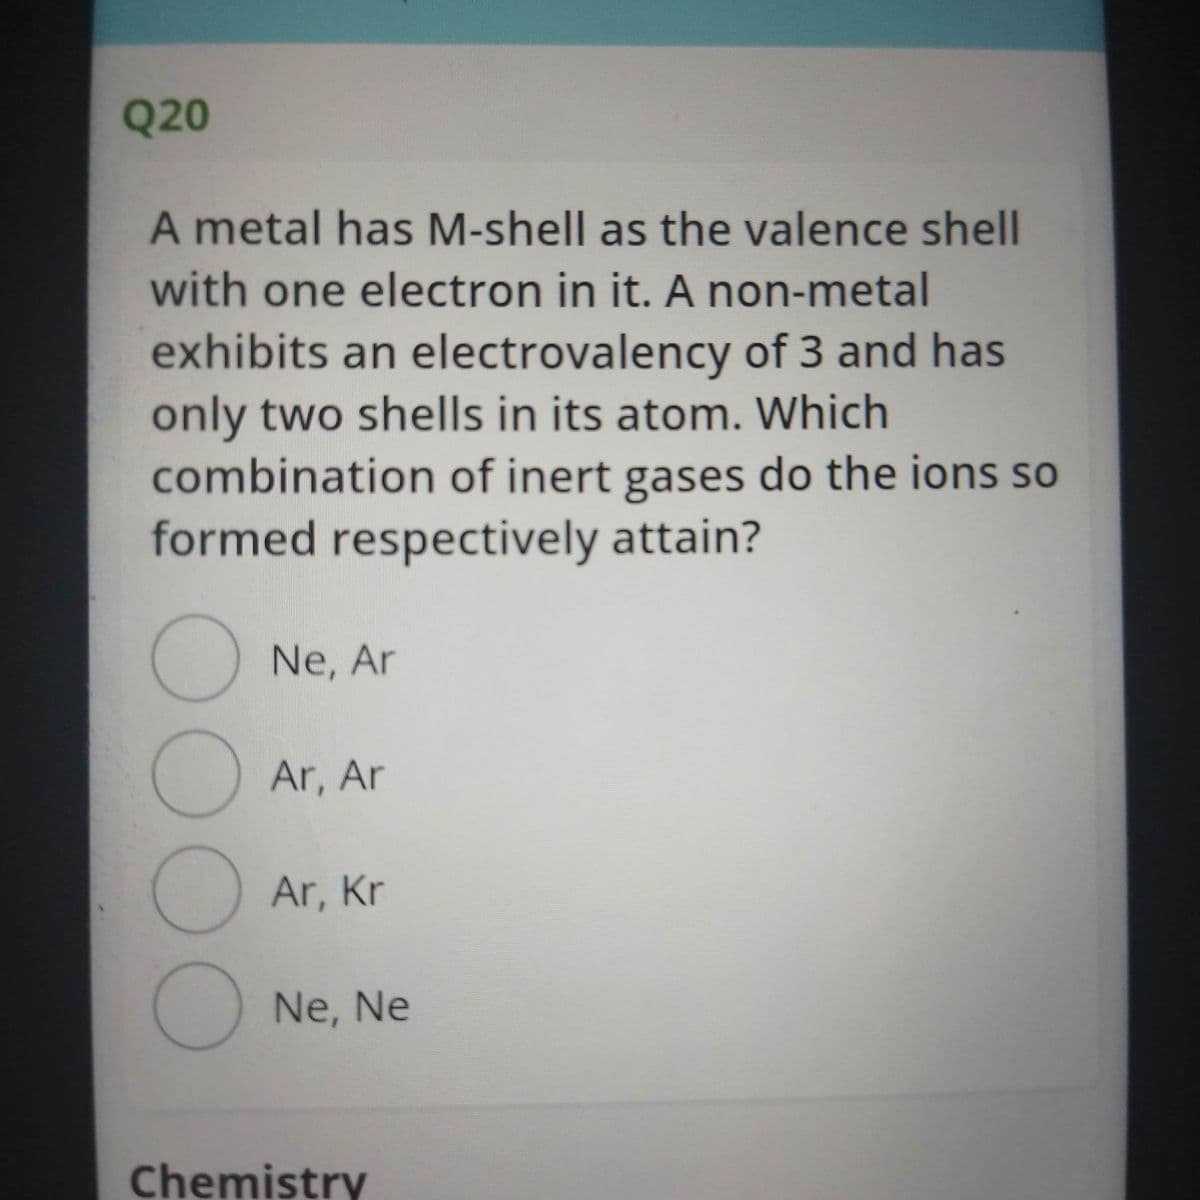 Q20
A metal has M-shell as the valence shell
with one electron in it. A non-metal
exhibits an electrovalency of 3 and has
only two shells in its atom. Which
combination of inert gases do the ions so
formed respectively attain?
Ne, Ar
Ar, Ar
Ar, Kr
Ne, Ne
Chemistry
00OO
